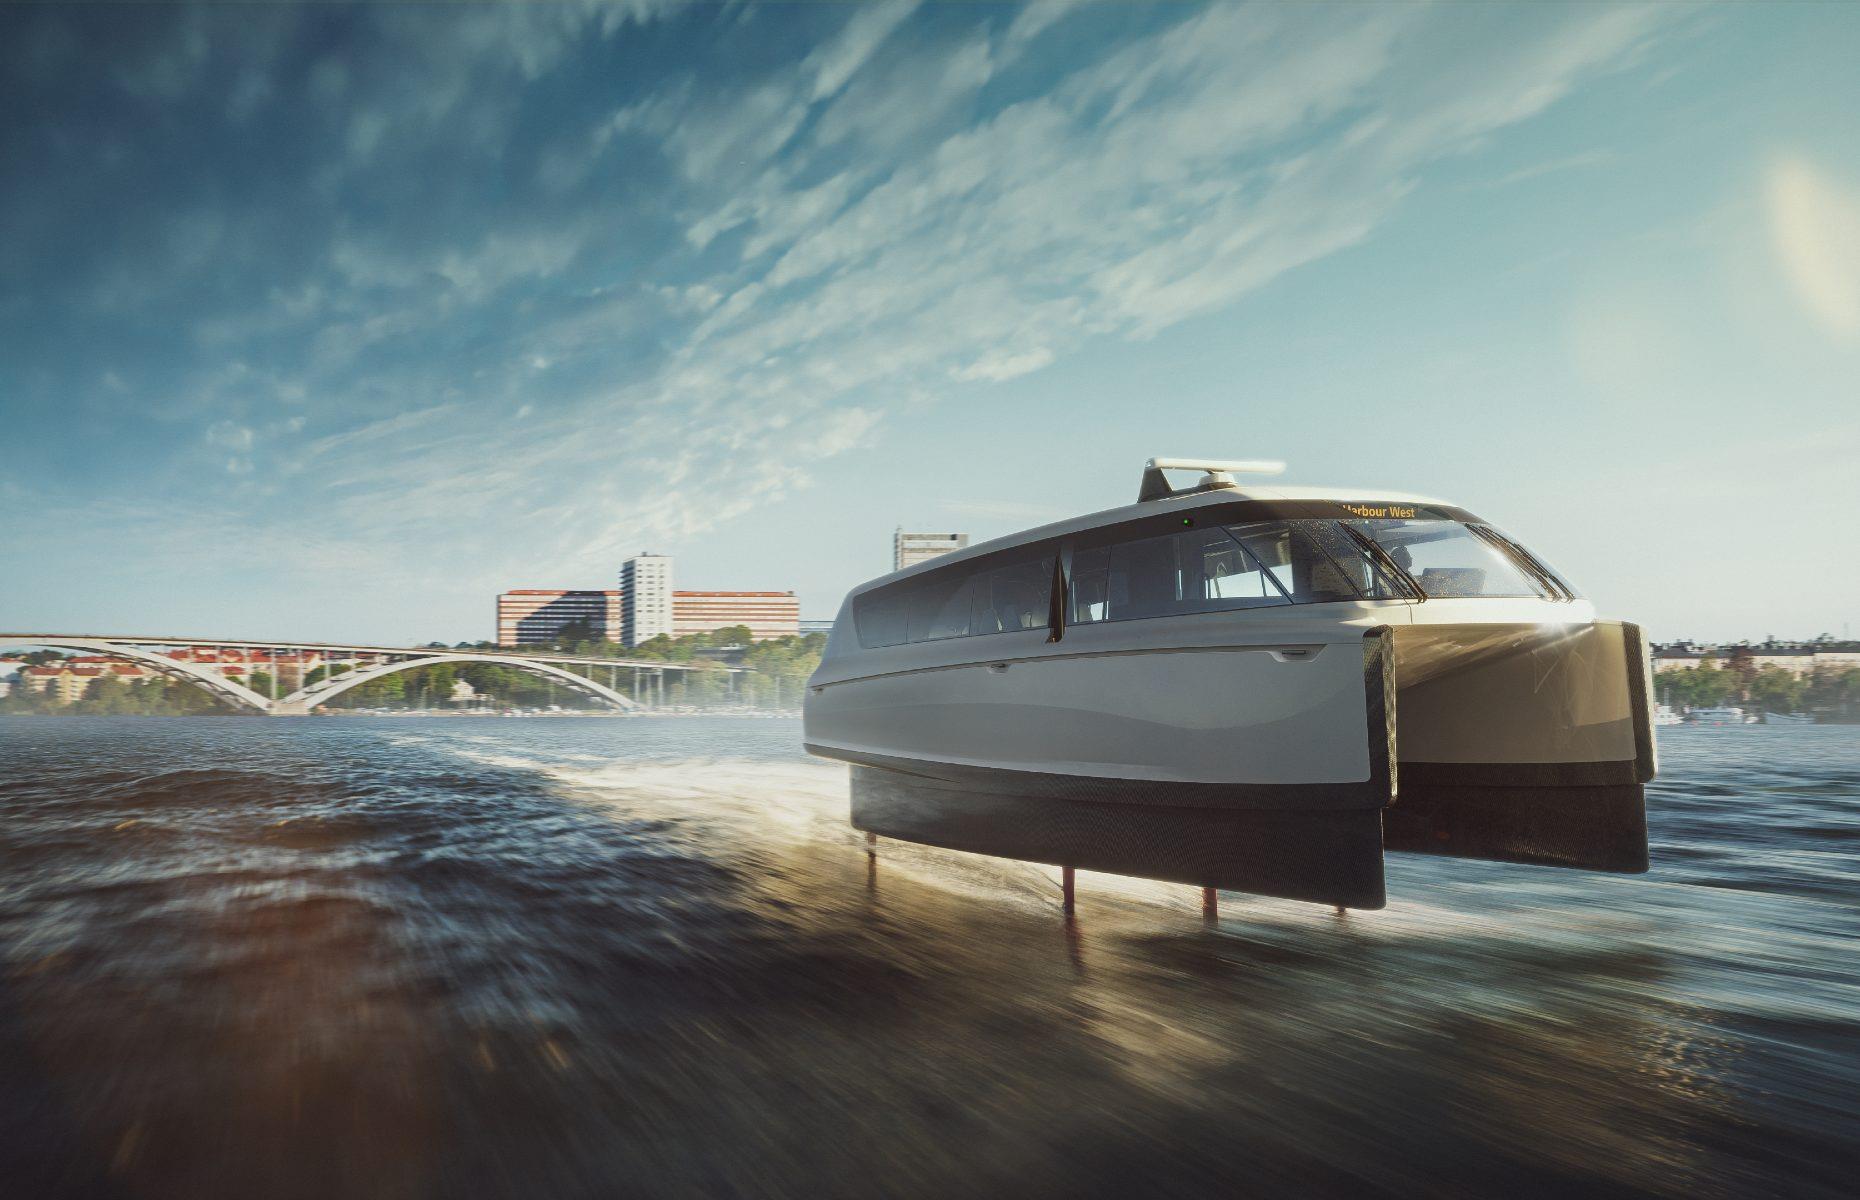 <p>The world's fastest and most energy-efficient electric ship, the Candela P-12 Shuttle, is coming to Stockholm in 2023 – and it promises to reduce emissions and slash commuting times by half. The 'flying' ferry has three carbon fiber wings that extend from underneath its hull, raising the ship above the water to decrease drag (and reduce seasickness). The futuristic ferries can carry 30 passengers and will initially travel from the Stockholm suburb of Ekerö to the city center in 25 minutes.</p>